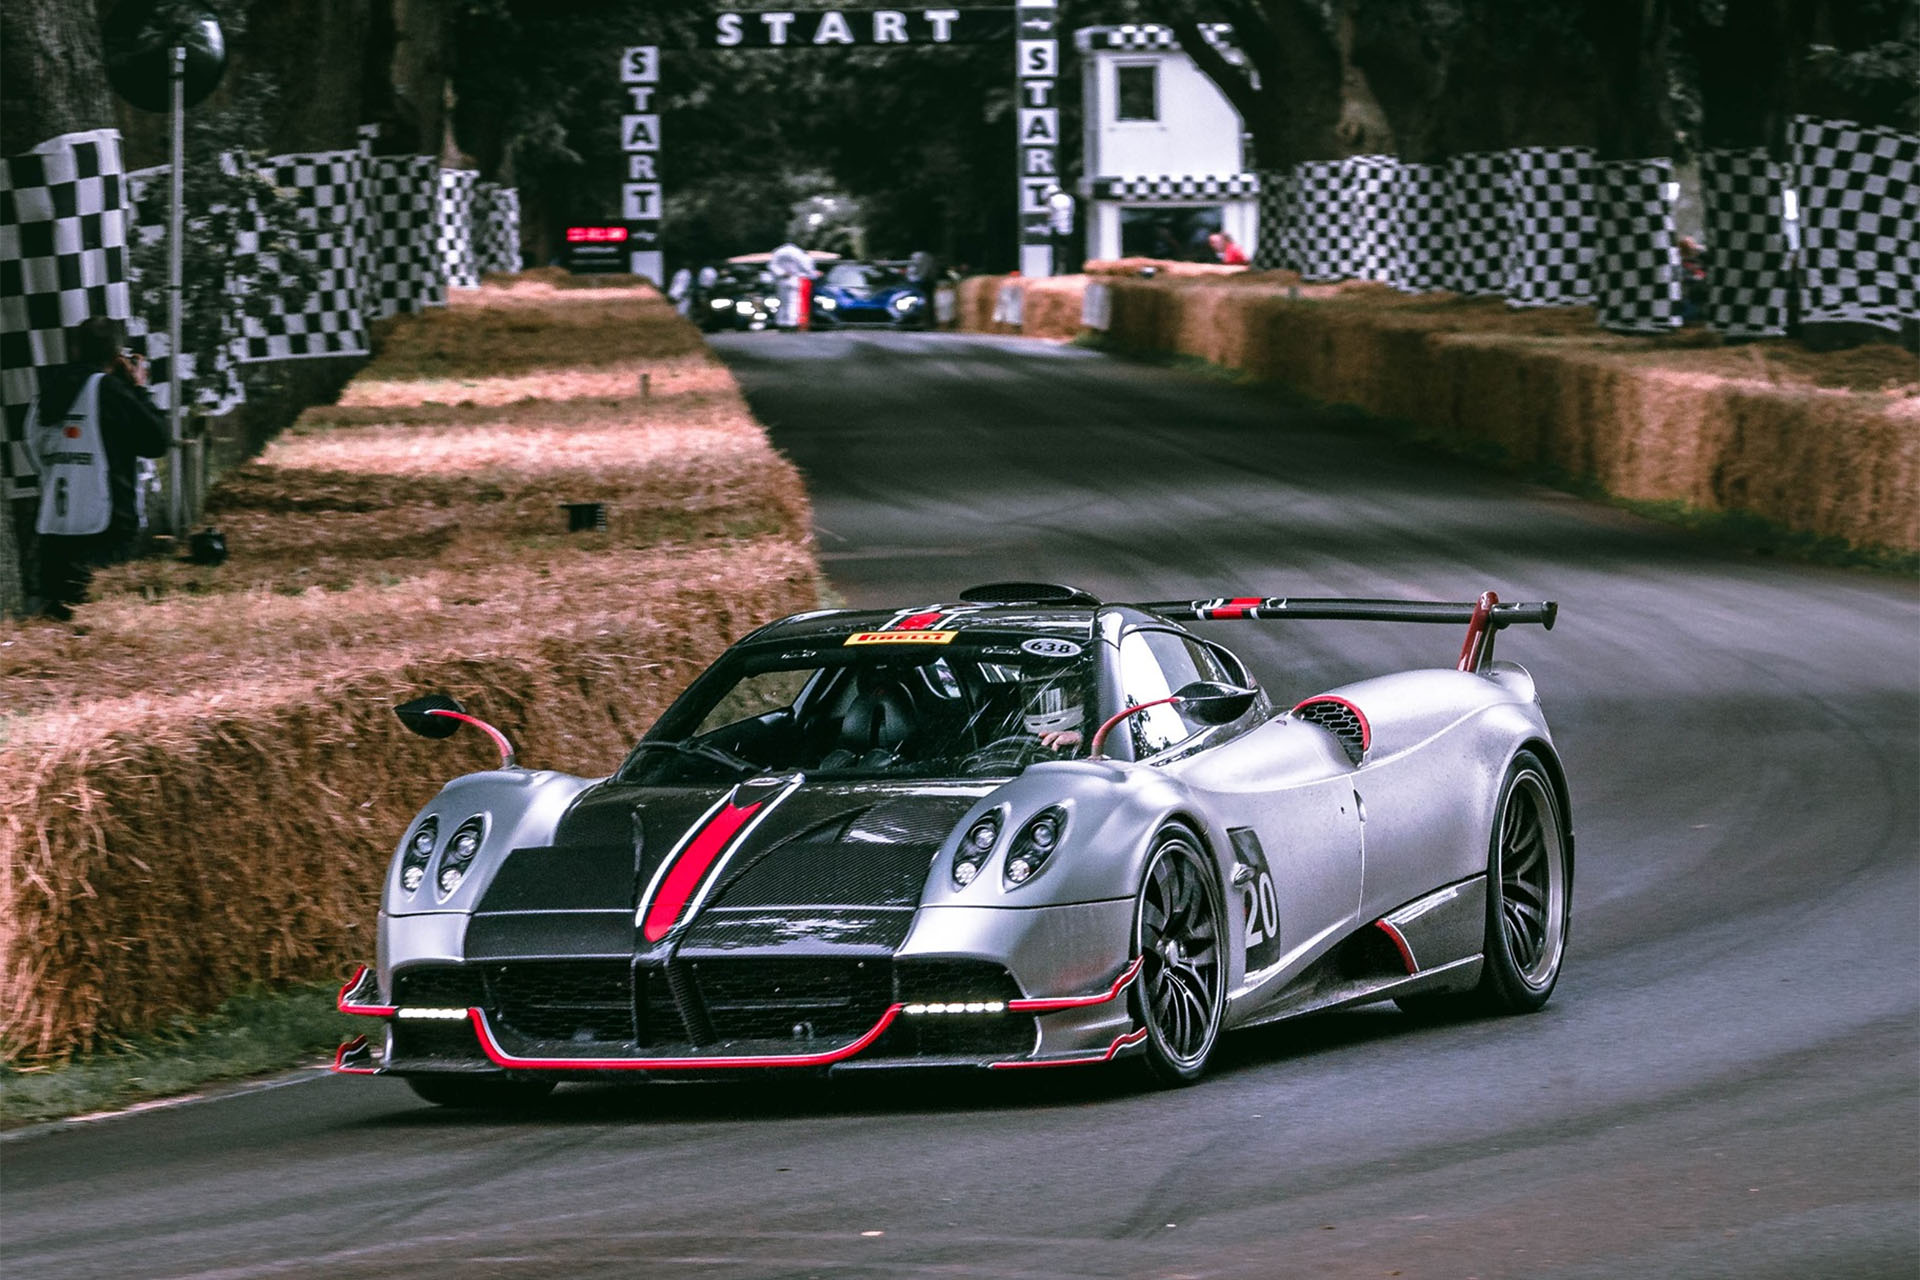 Pagani Imola - The powerhouse of technology for the racetrack and road 